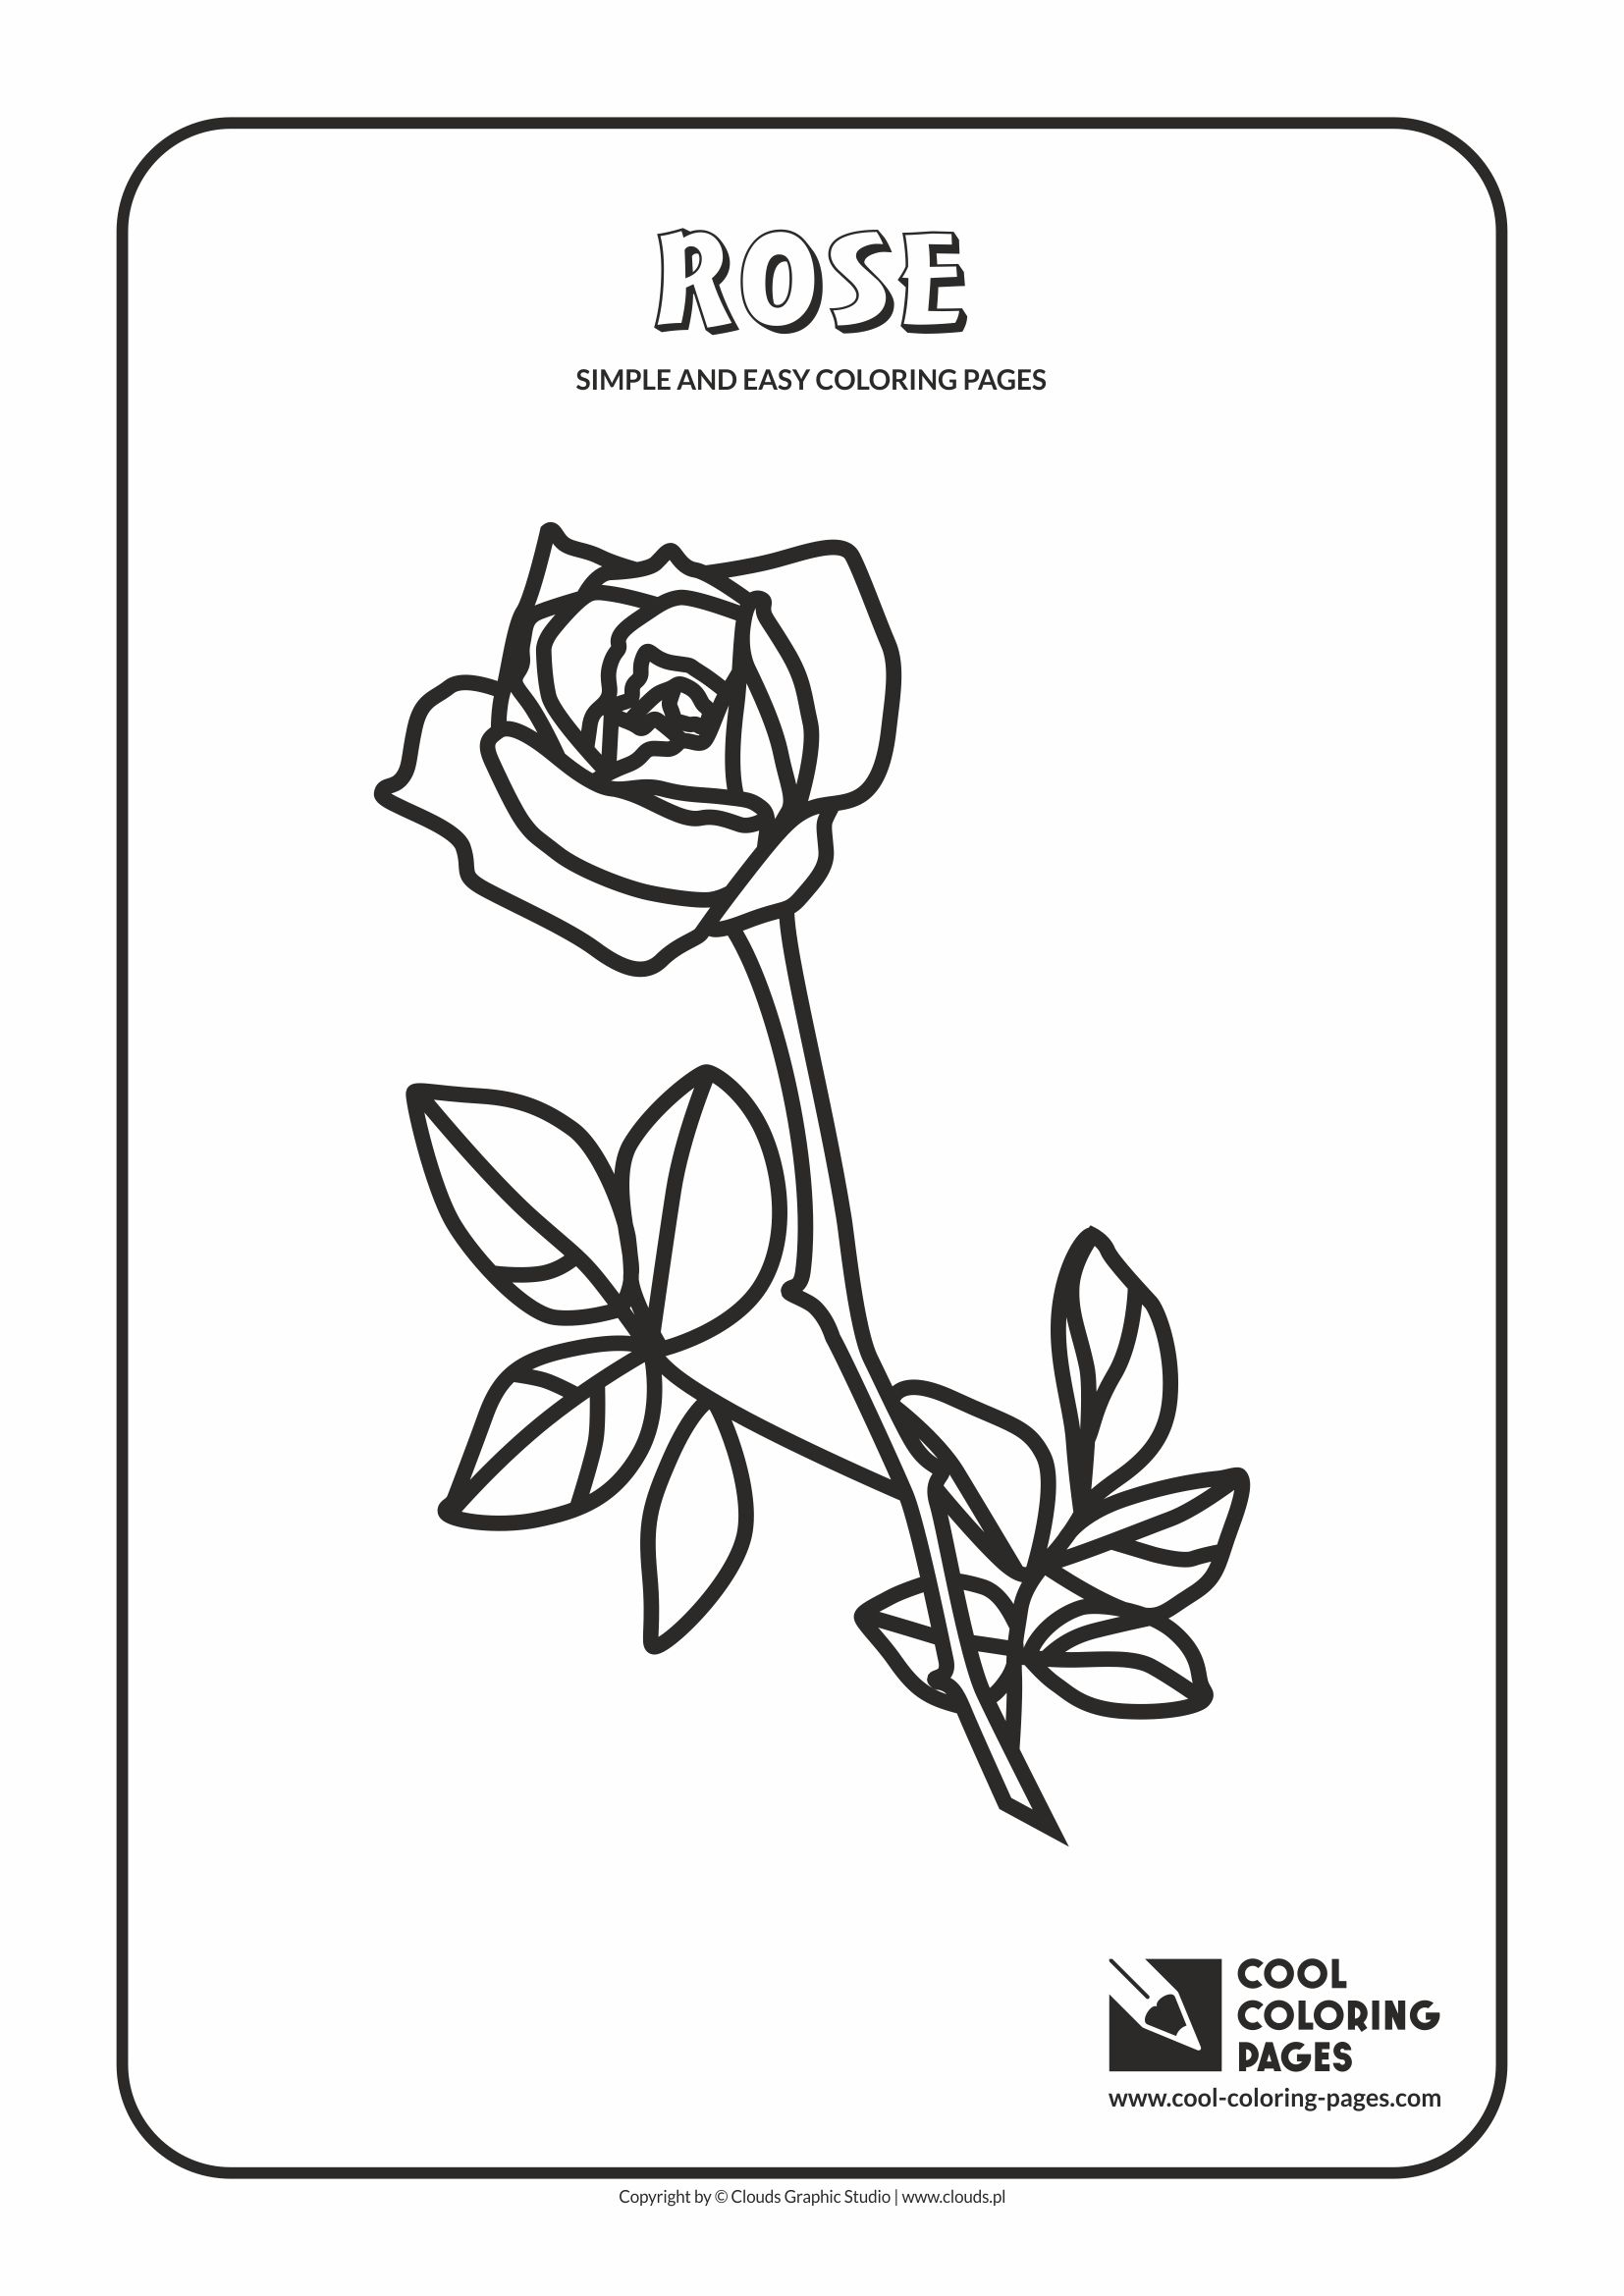 Simple and easy coloring pages for toddlers - Rose